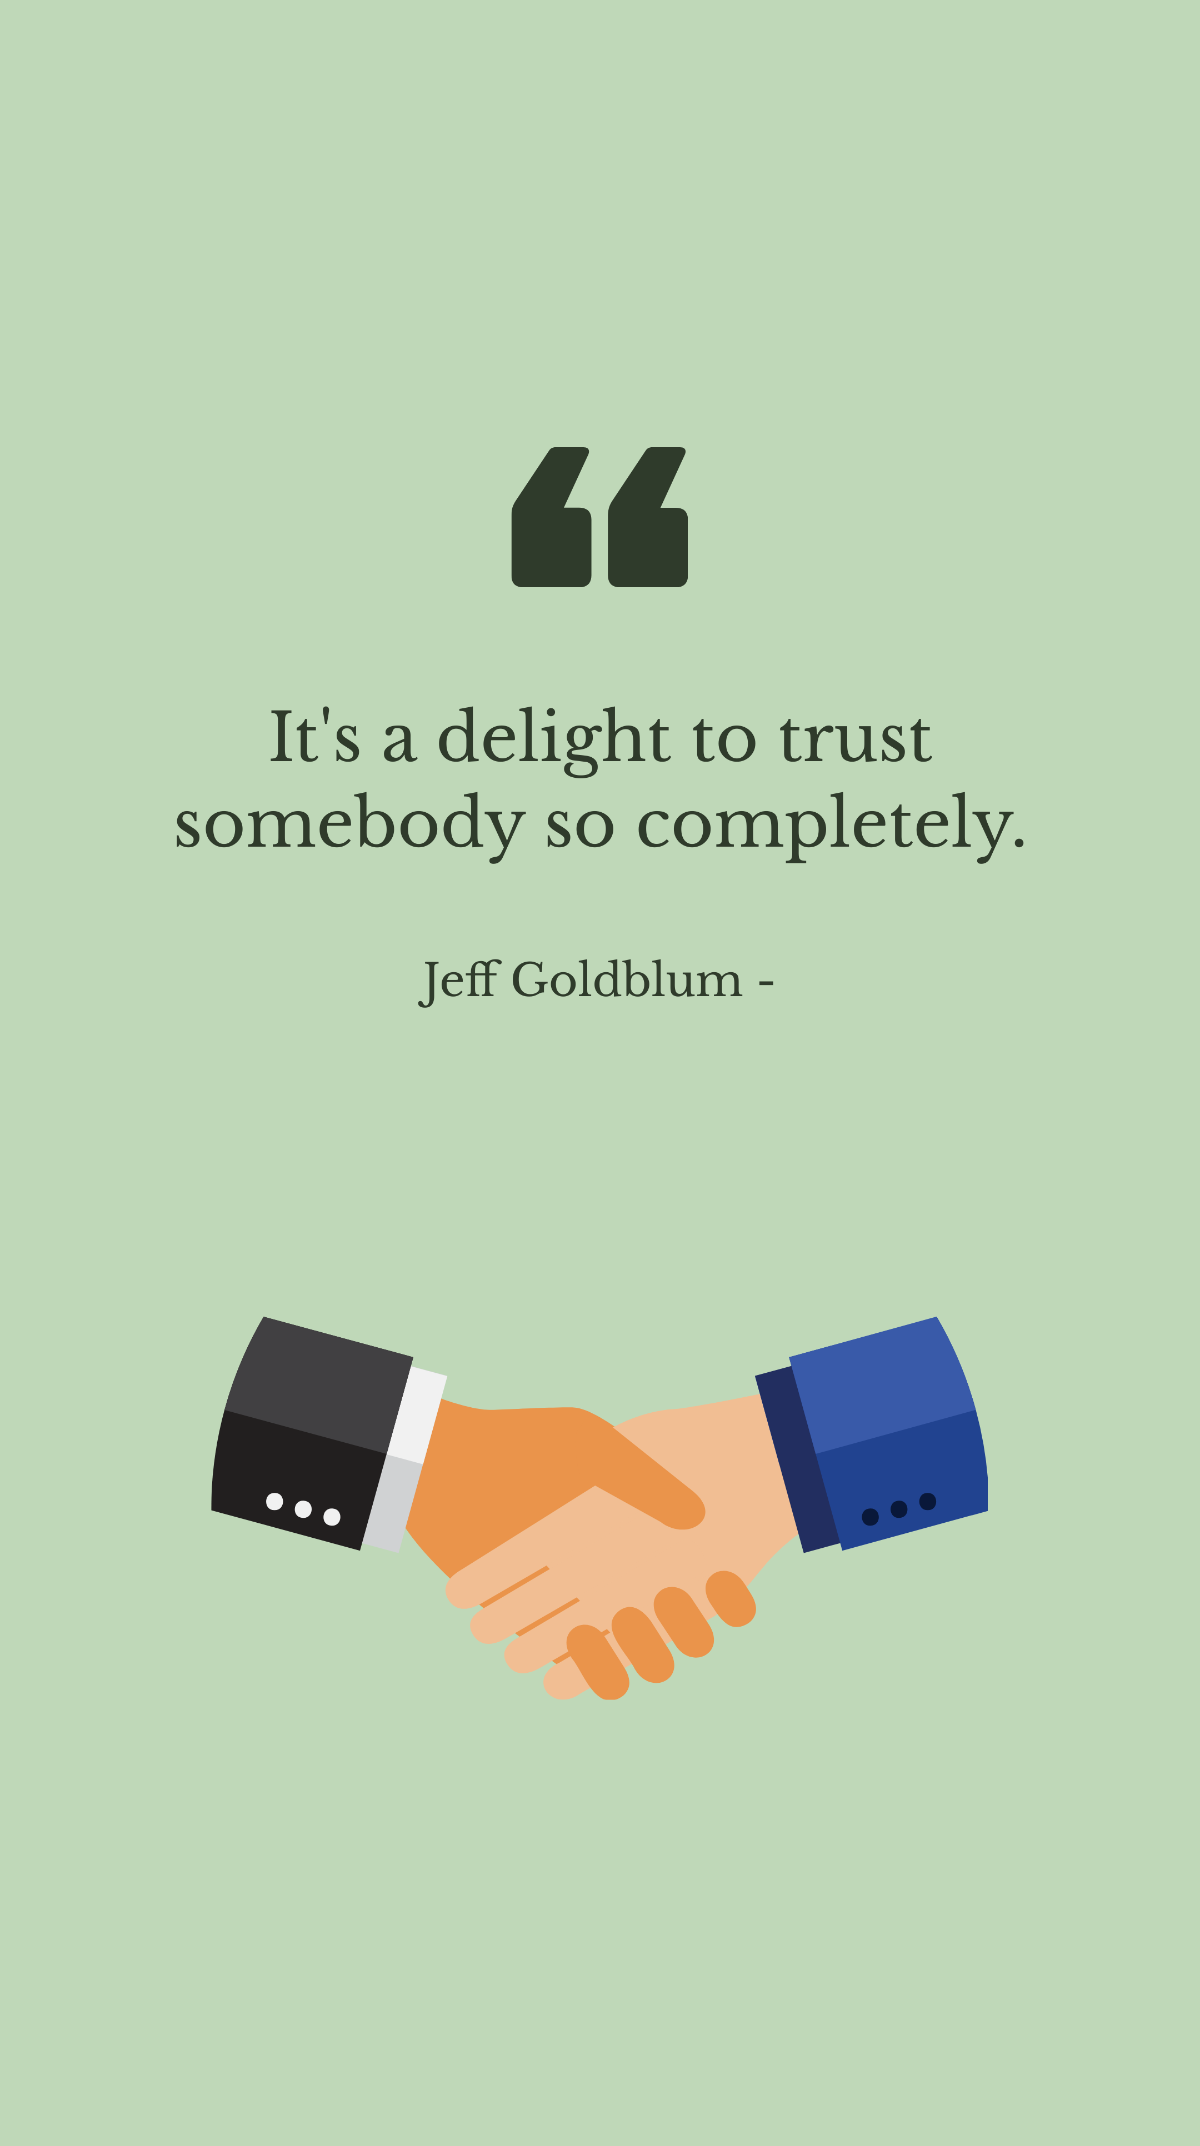 Jeff Goldblum - It's a delight to trust somebody so completely. Template